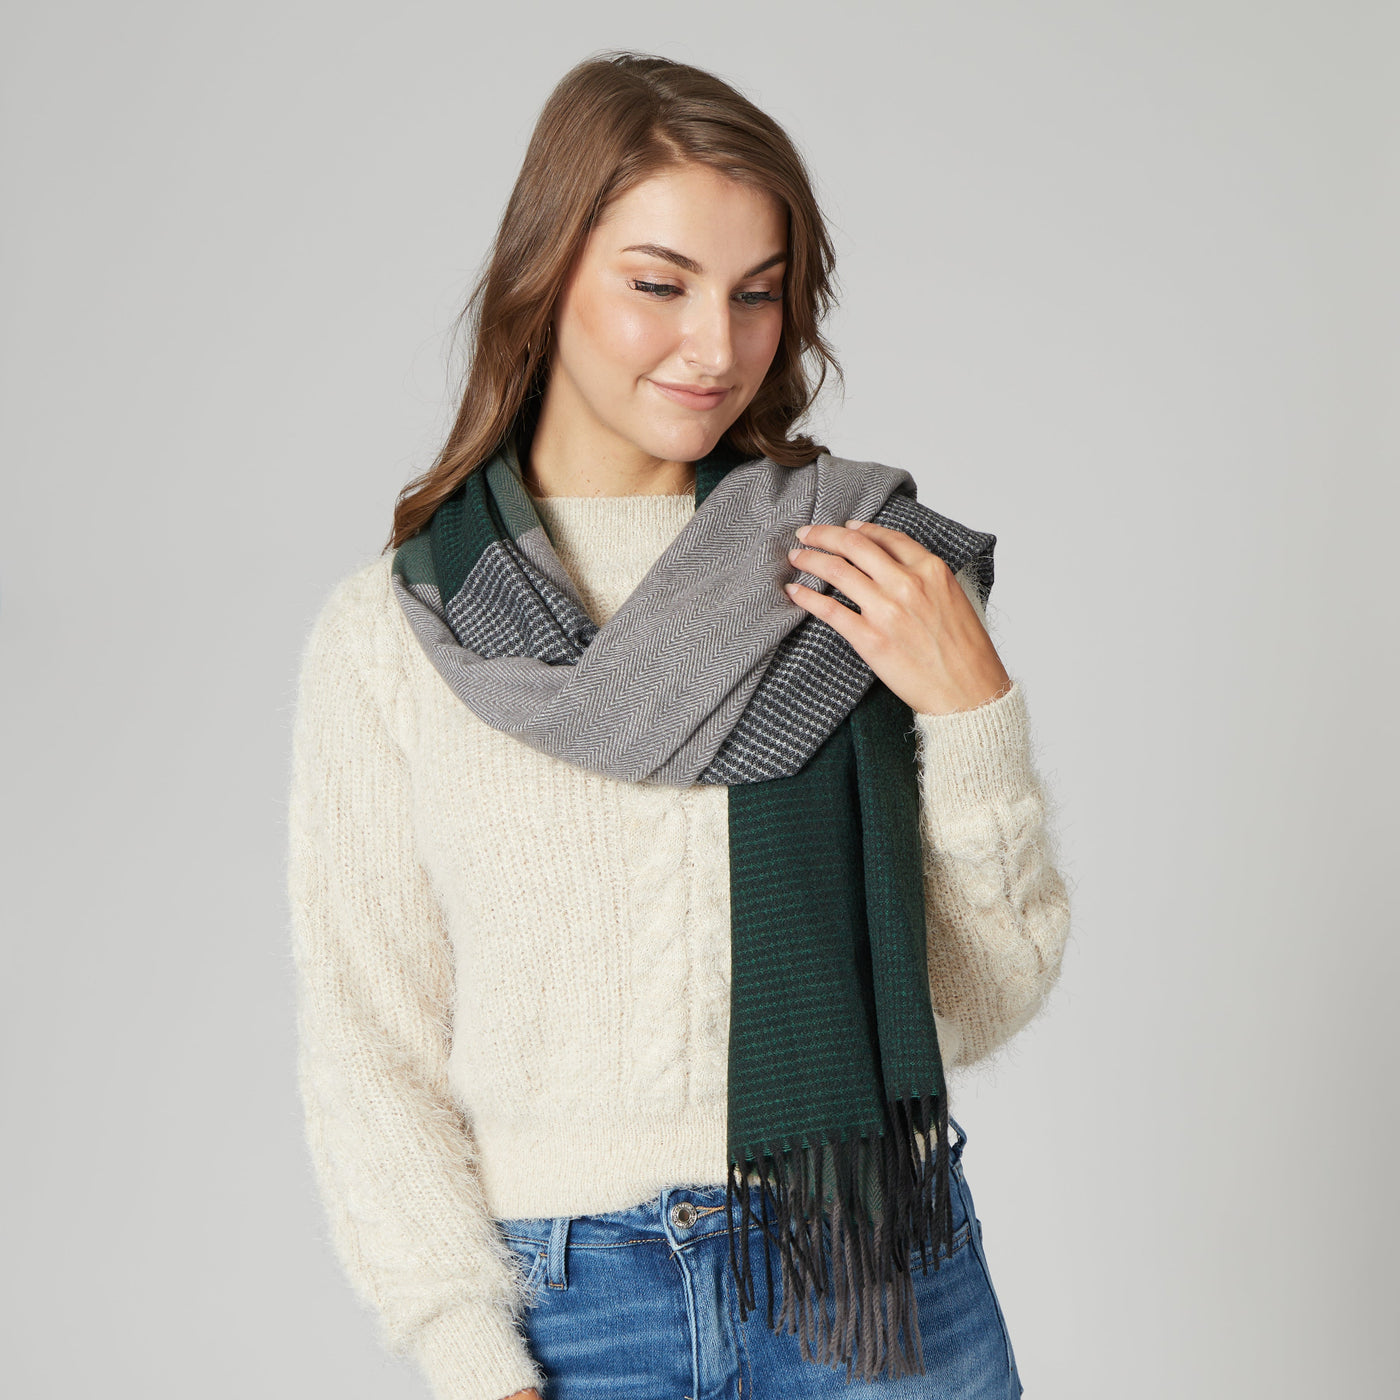 SCARF - Georgia - Women's Woven Plaid Scarf With Braided Fringe